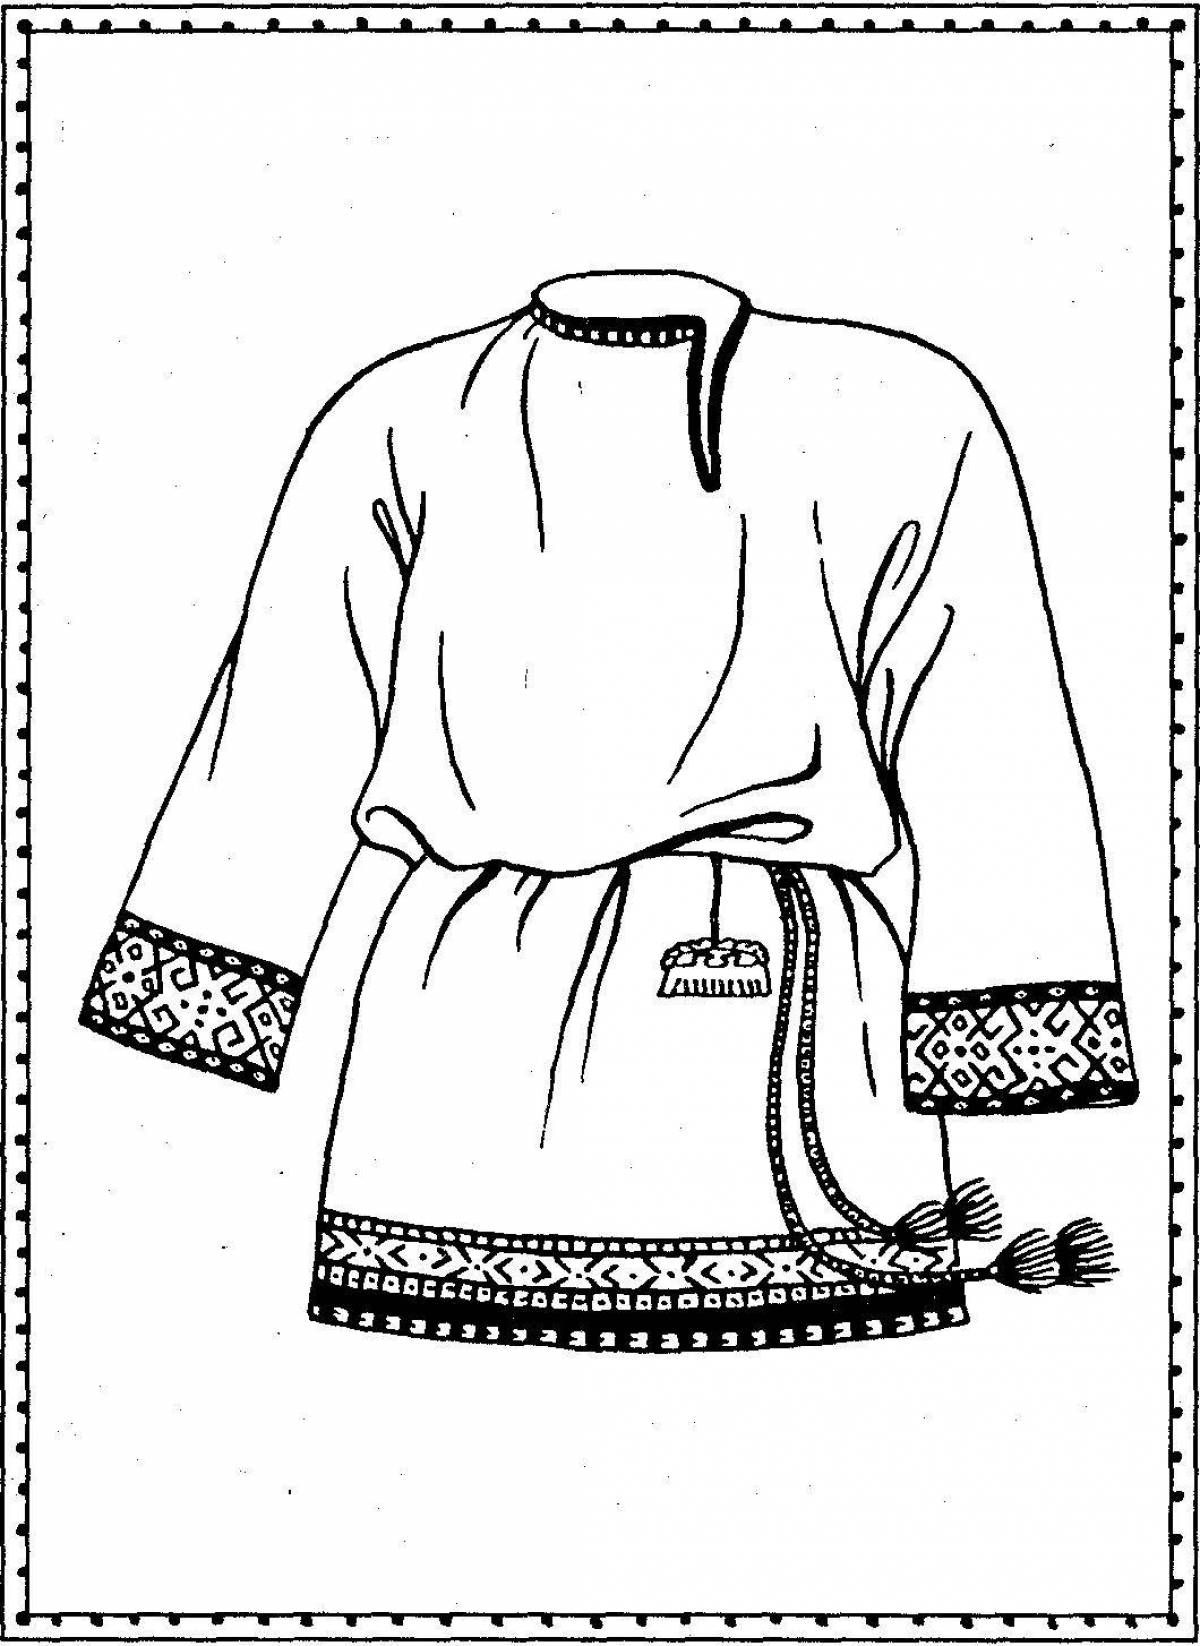 Coloring book radiant male Russian folk costume